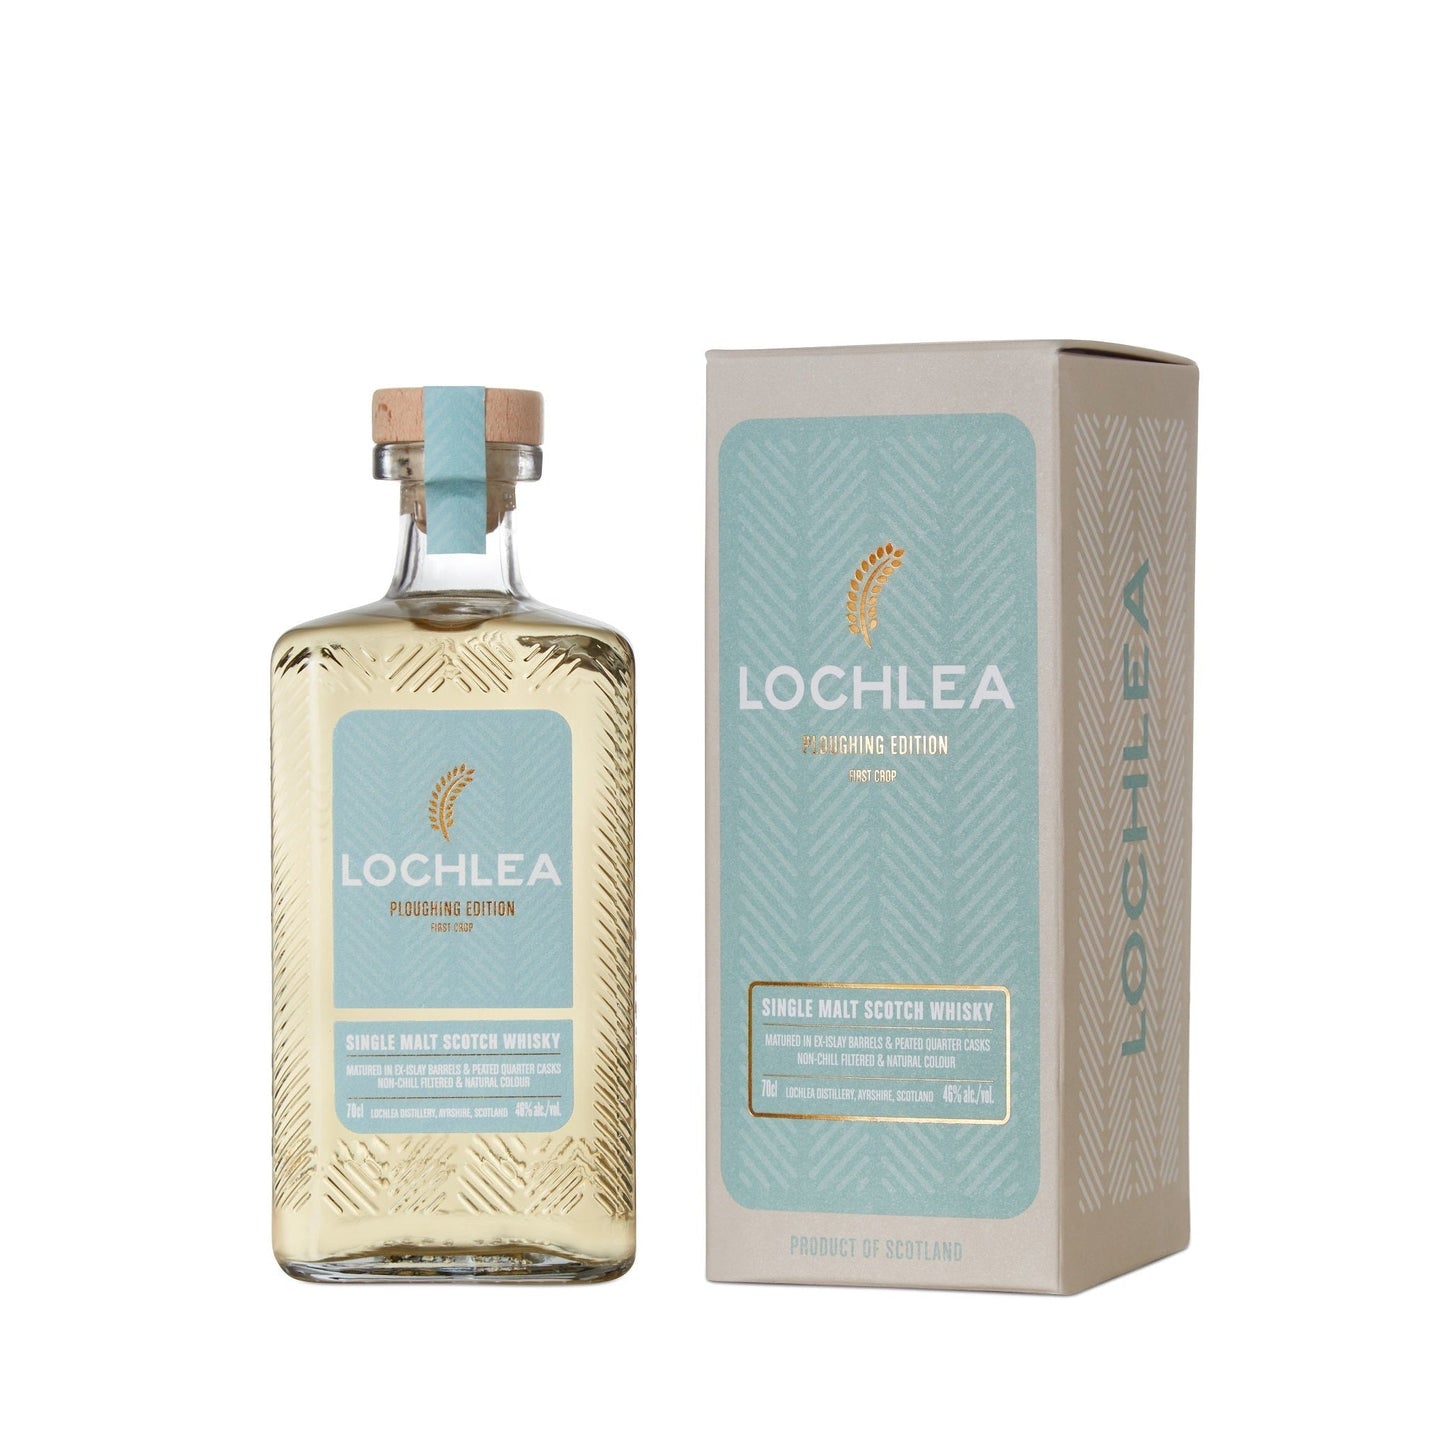 Lochlea Ploughing Edition (First Crop) - Single Malt Scotch Whisky-Single Malt Scotch Whisky-5065008253051-Fountainhall Wines